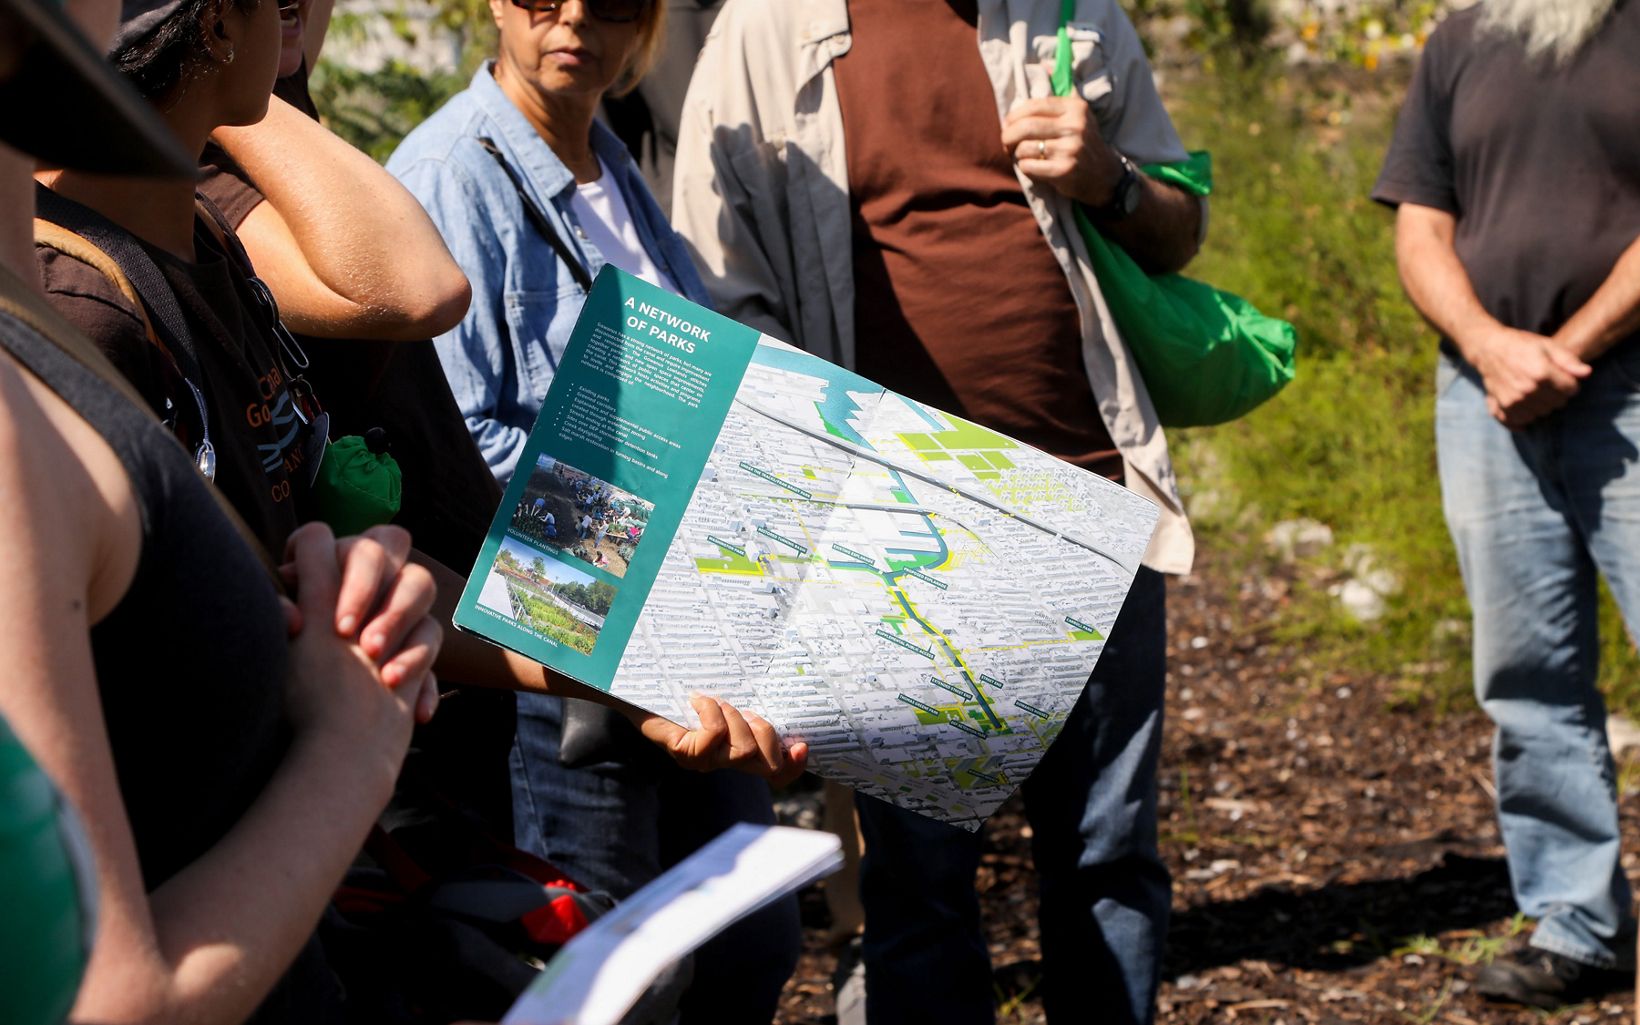 A volunteer holds a Gowanus Canal Conservancy map brochure with the words "A Network of Parks" written as the title of the map.